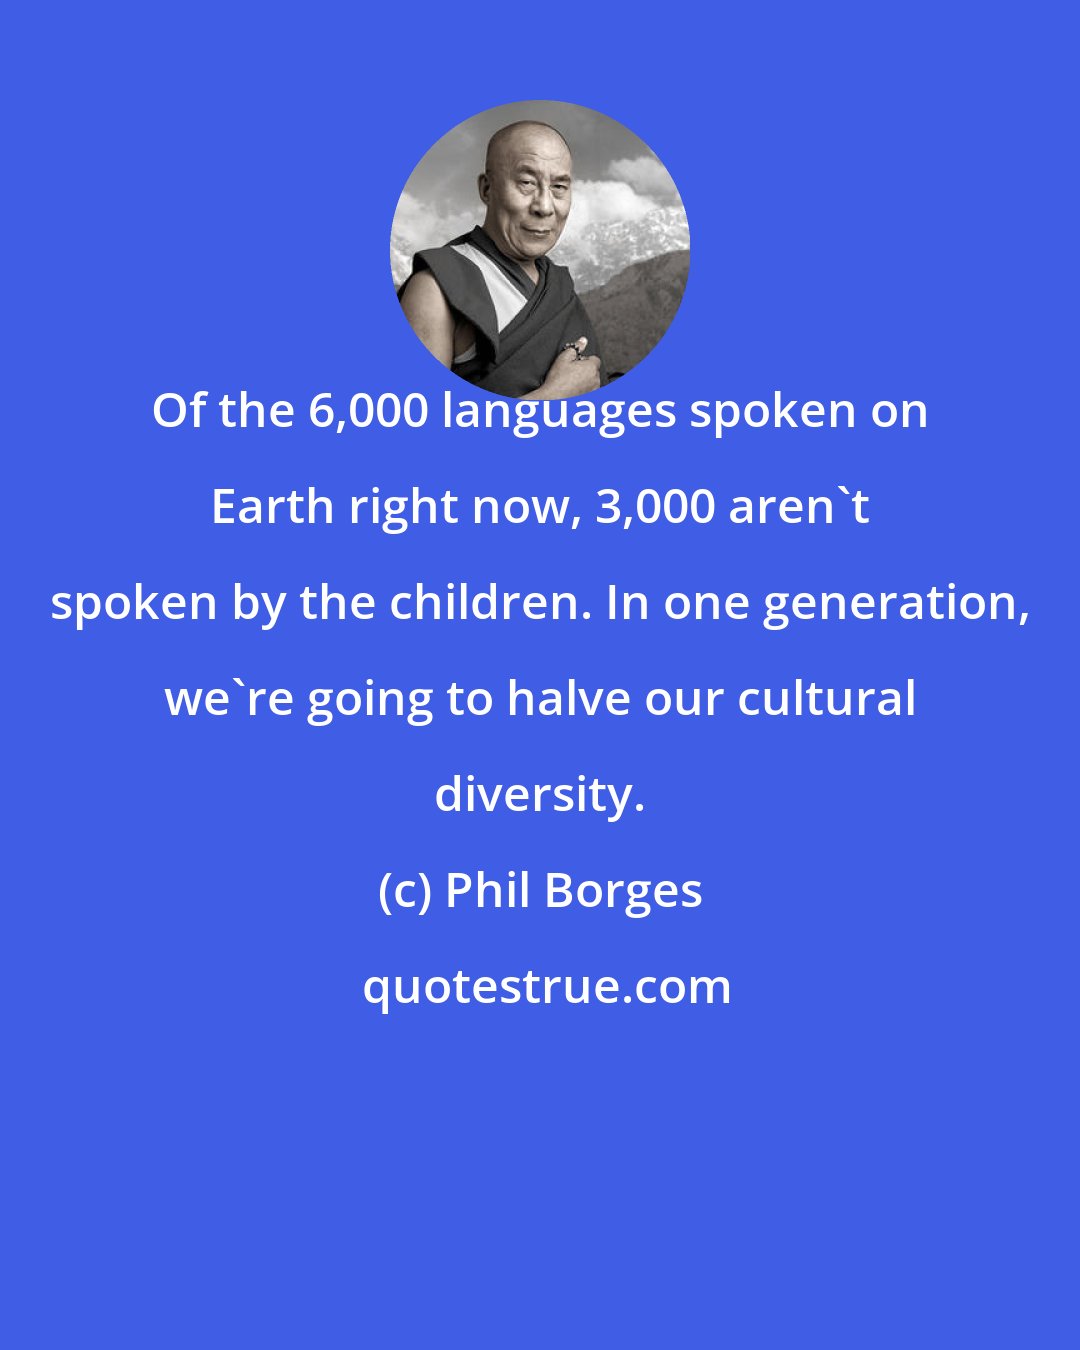 Phil Borges: Of the 6,000 languages spoken on Earth right now, 3,000 aren't spoken by the children. In one generation, we're going to halve our cultural diversity.